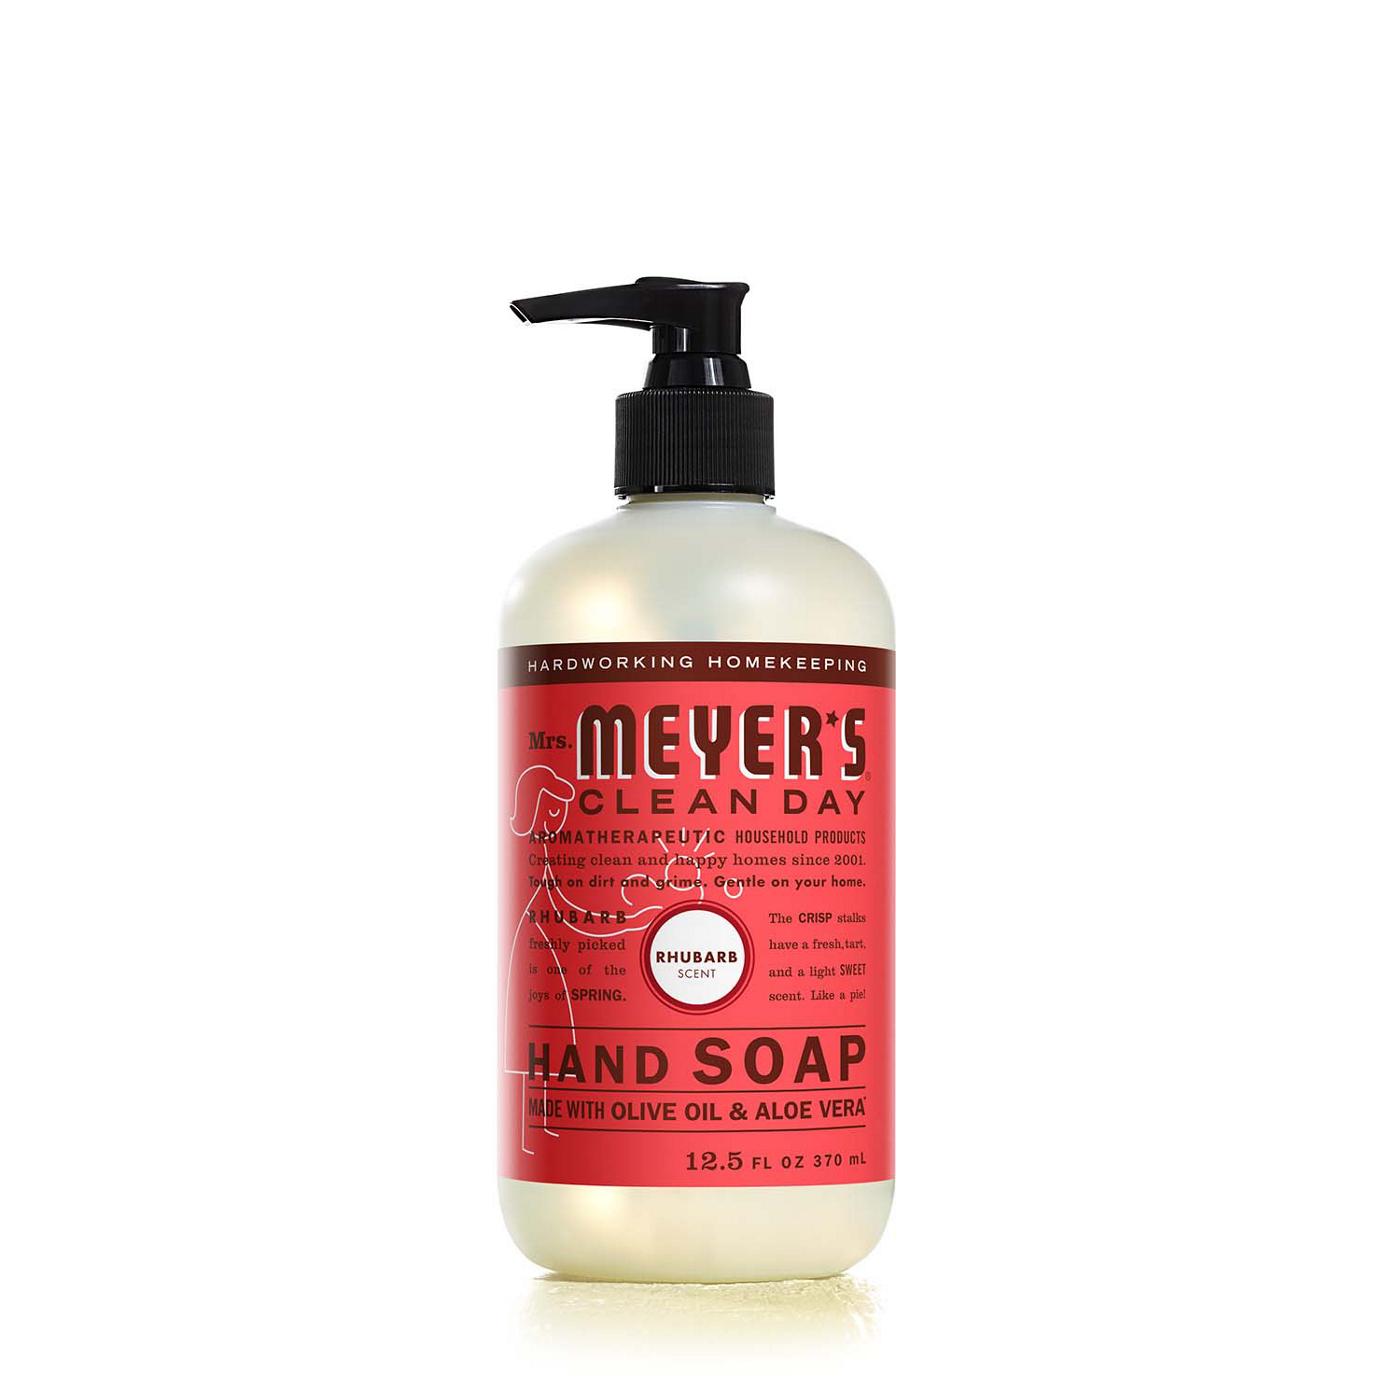 Mrs. Meyer's Clean Day Rhubarb Scent Liquid Hand Soap; image 1 of 5